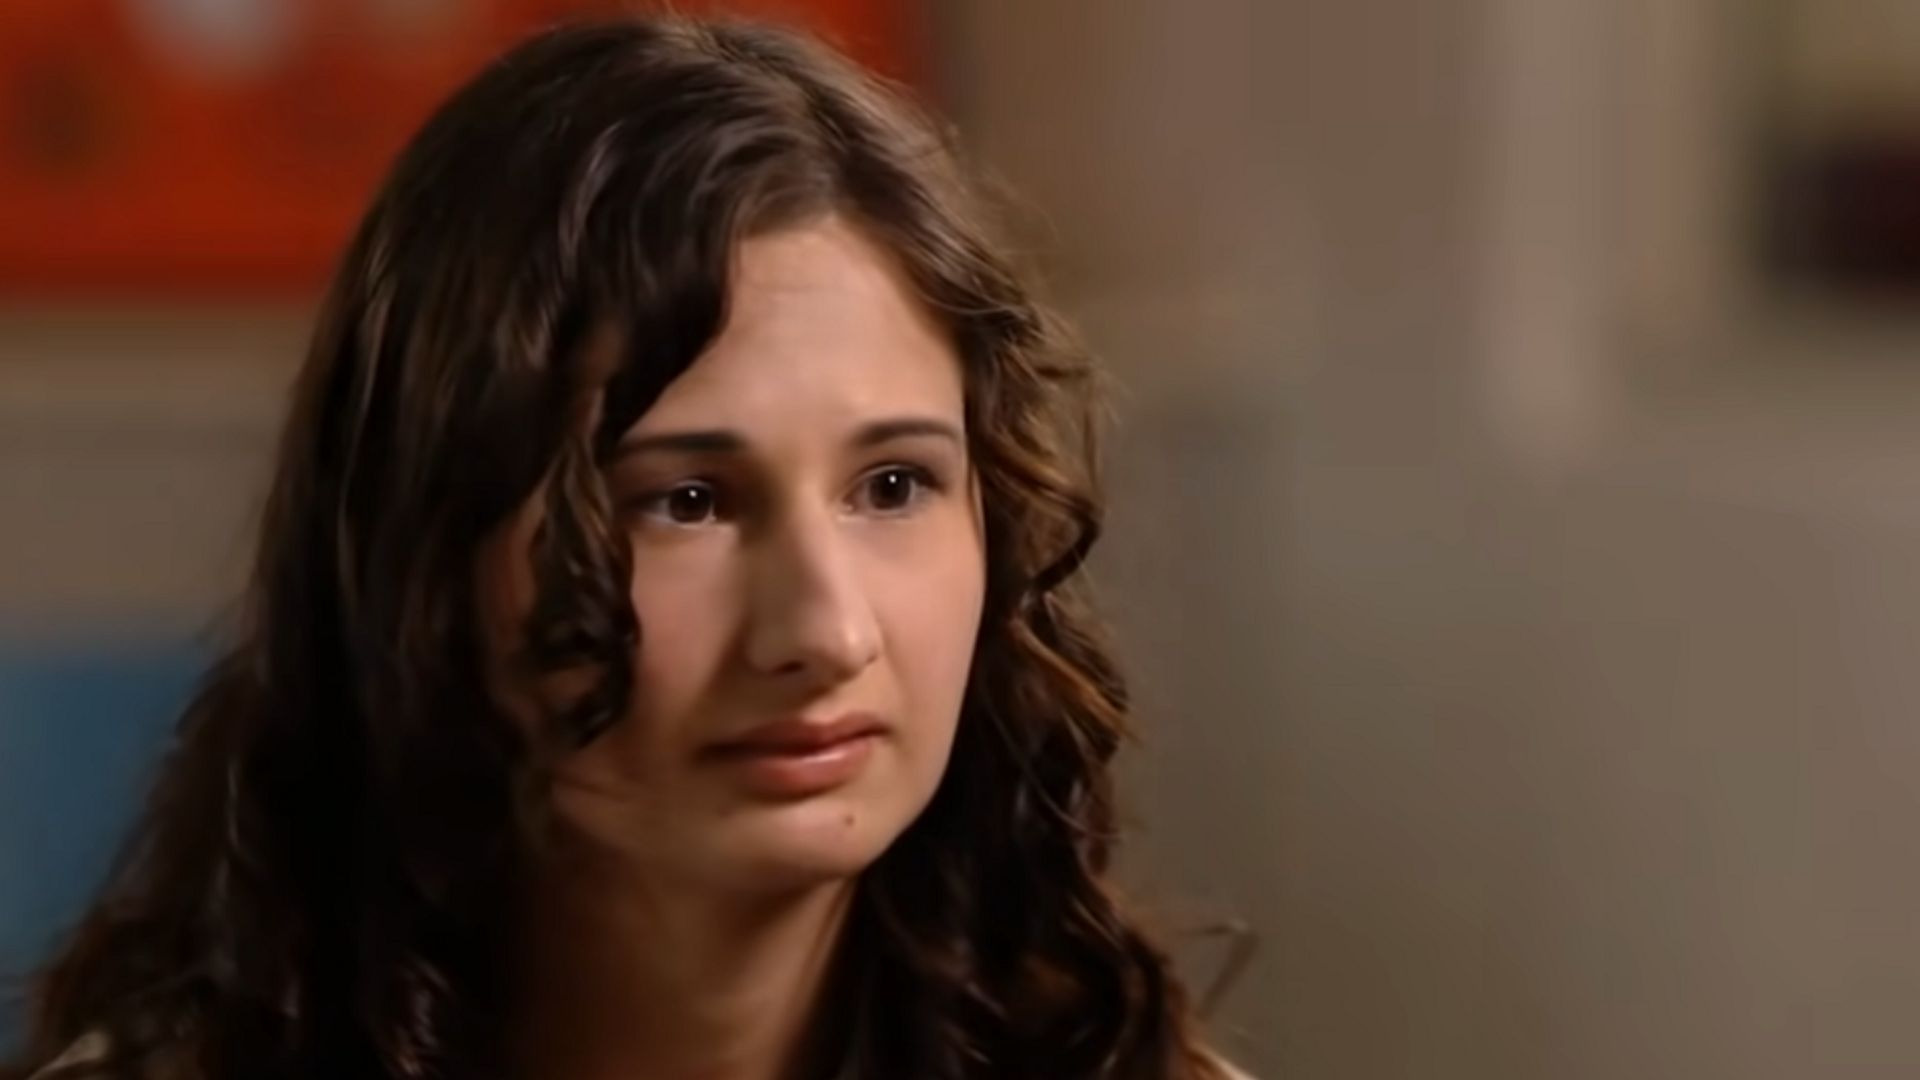 Still from Gypsy Rose Blanchard's 2019 interview on ABC's 20/20 with Amy Robach